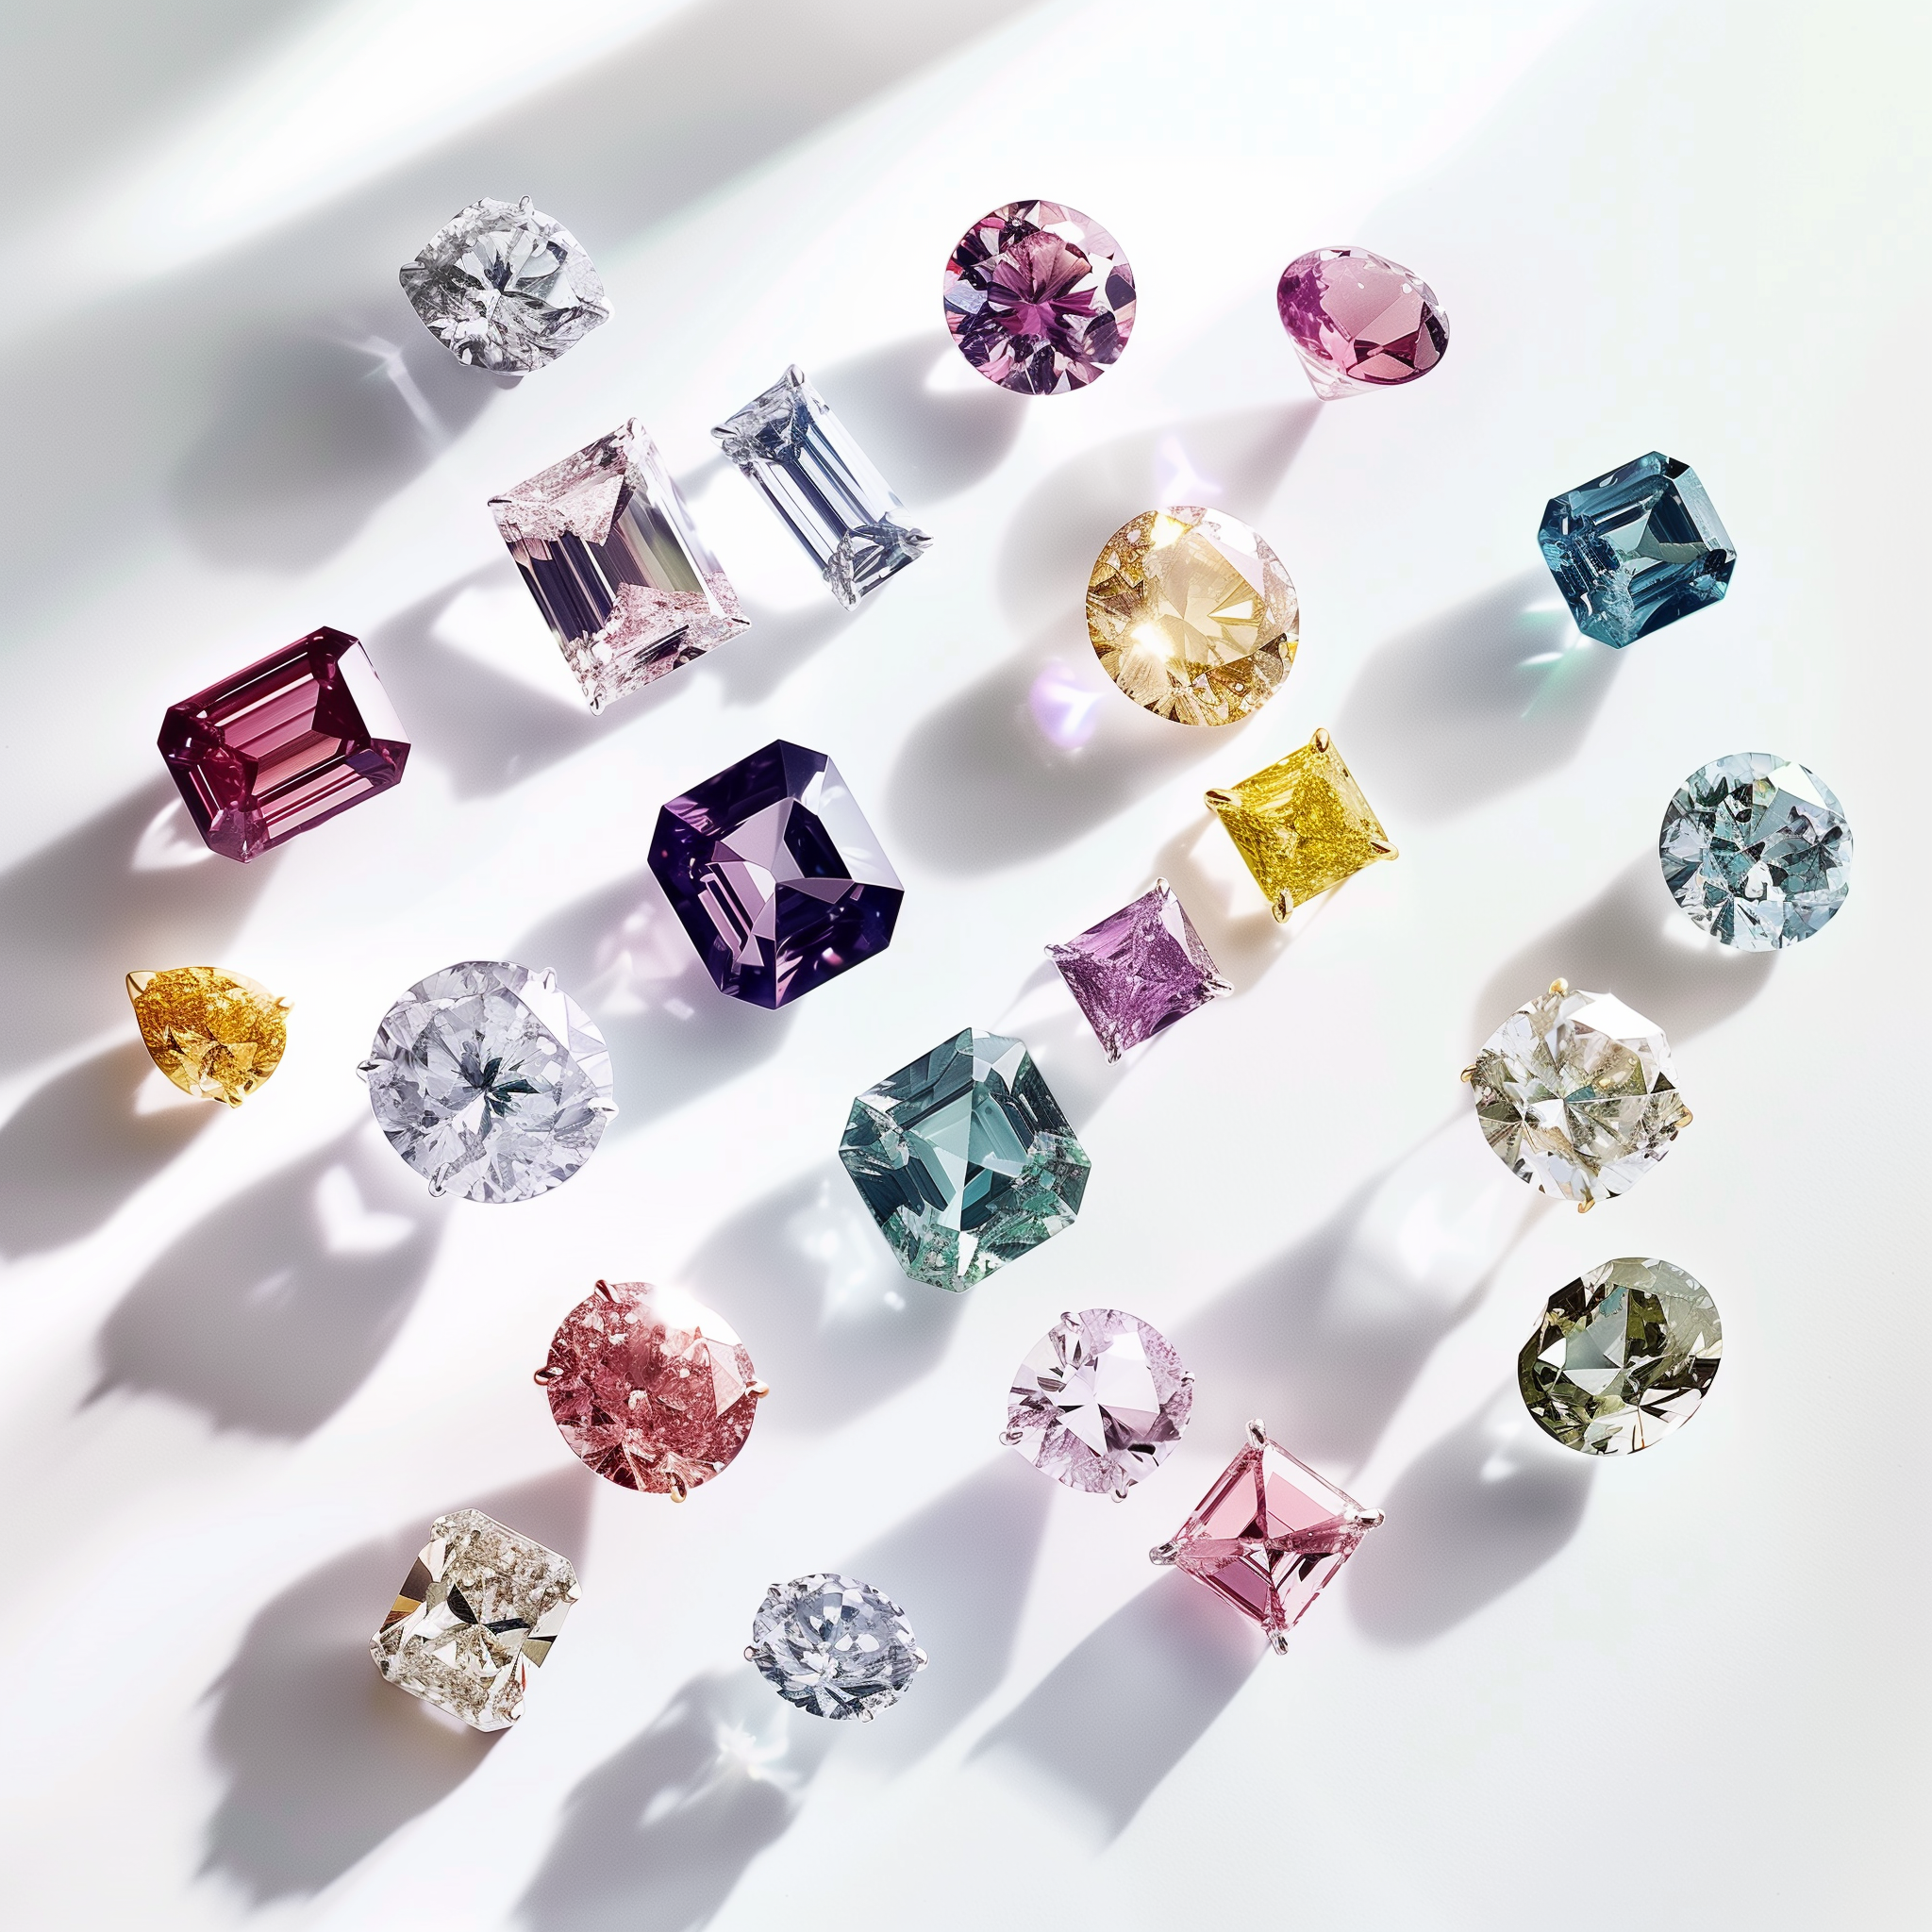 Demystifying Lab-Grown Diamonds: Are They the Real Deal?